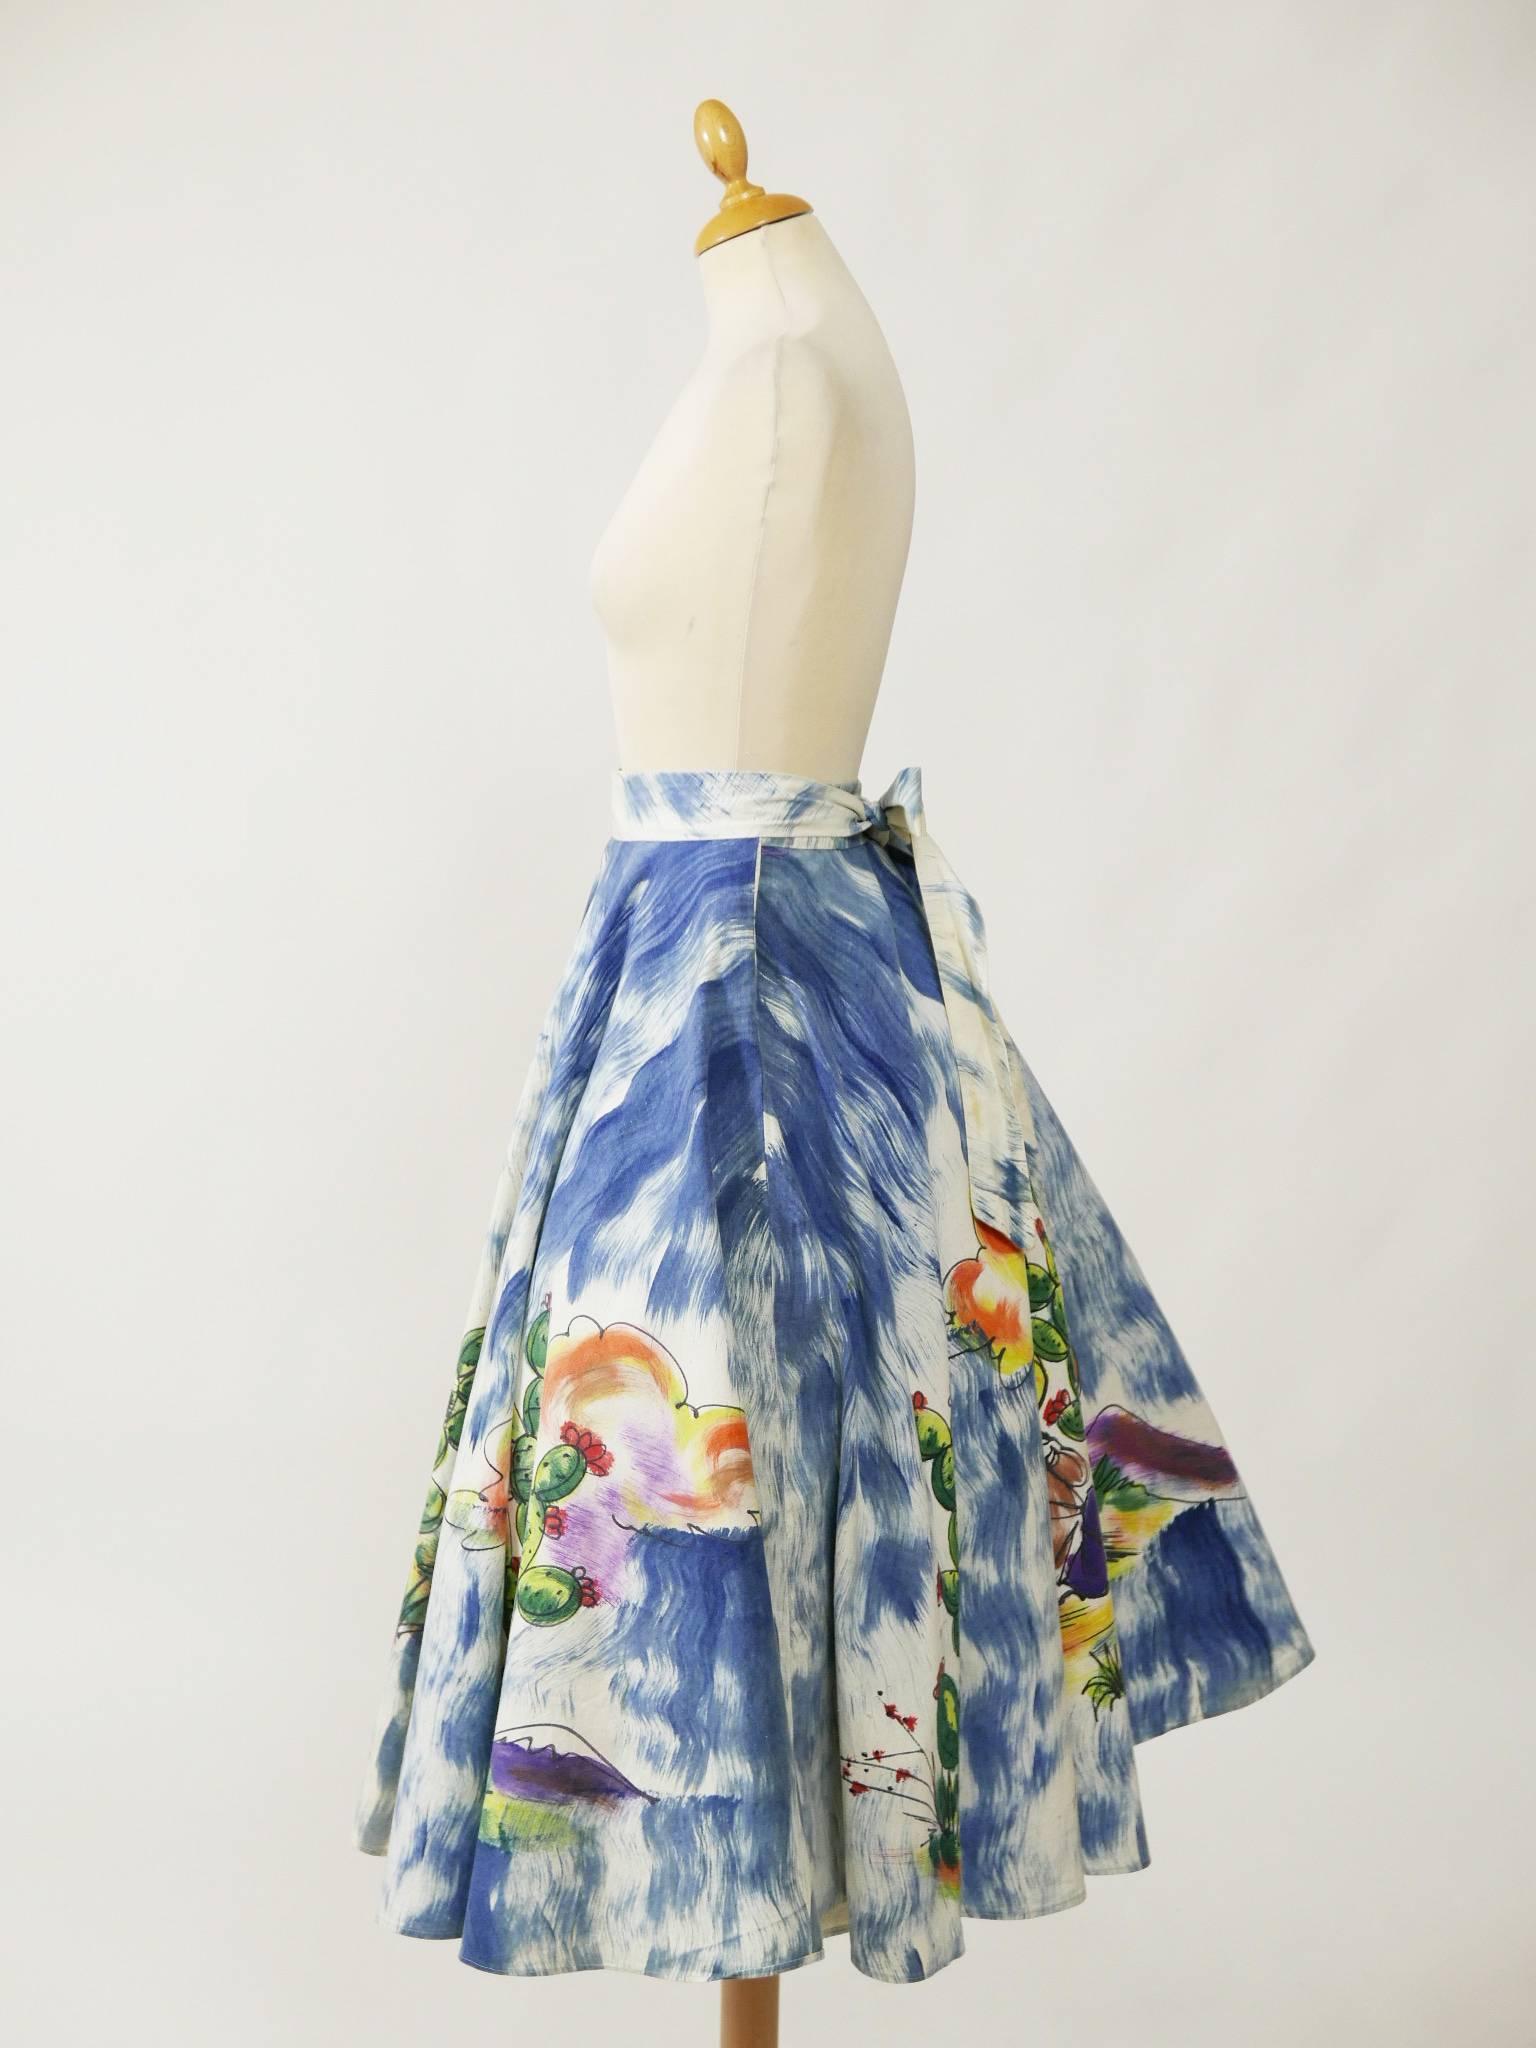 This amazing 1950s full circle skirt is in a gorgeous handpainted mexican print cotton fabric. It has ties in the front with hooks that attach in the back.

Good vintage condition 

Petticoat worn under the skirt for added volume

Label: